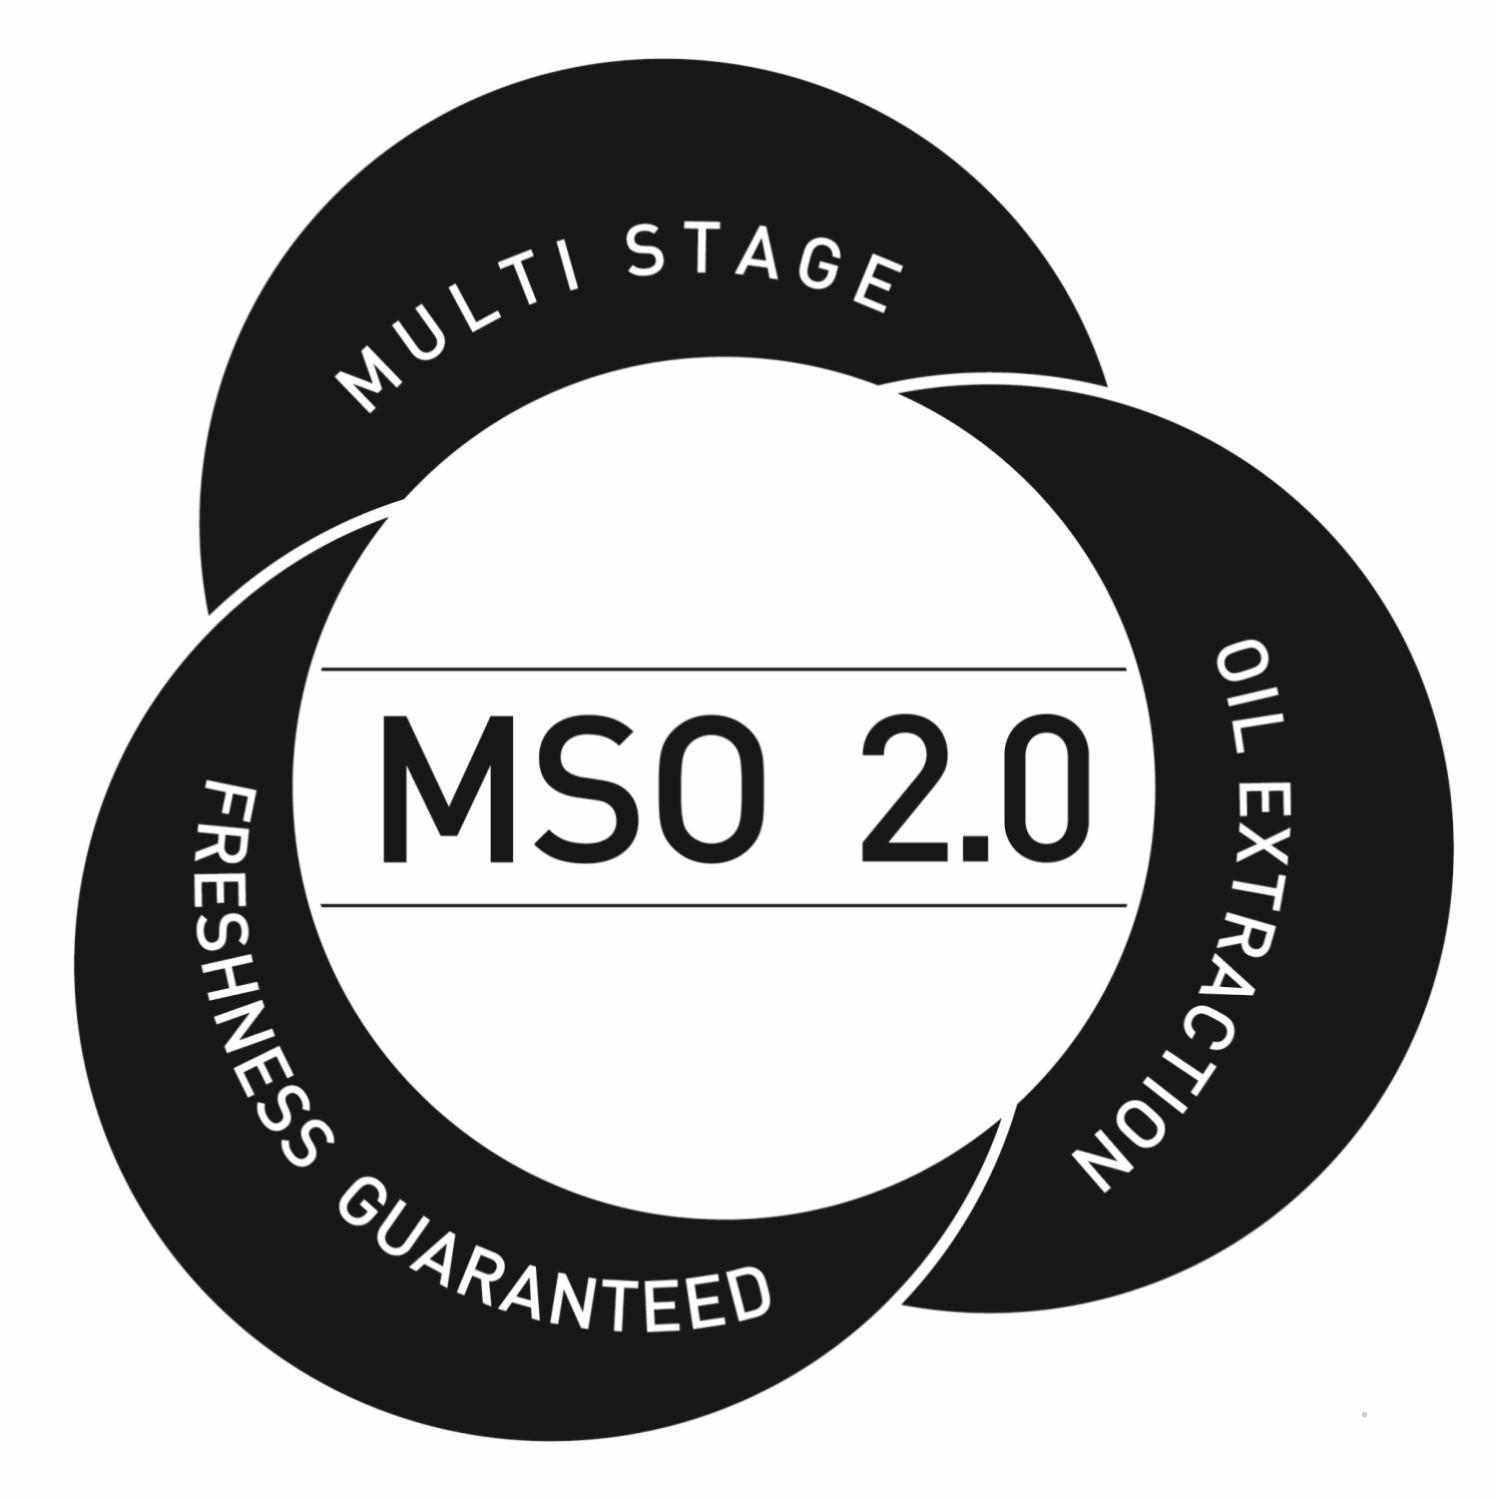 MULTI STAGE OIL EXTRACTION FRESHNESS GURANTEED MSO 2.0logo